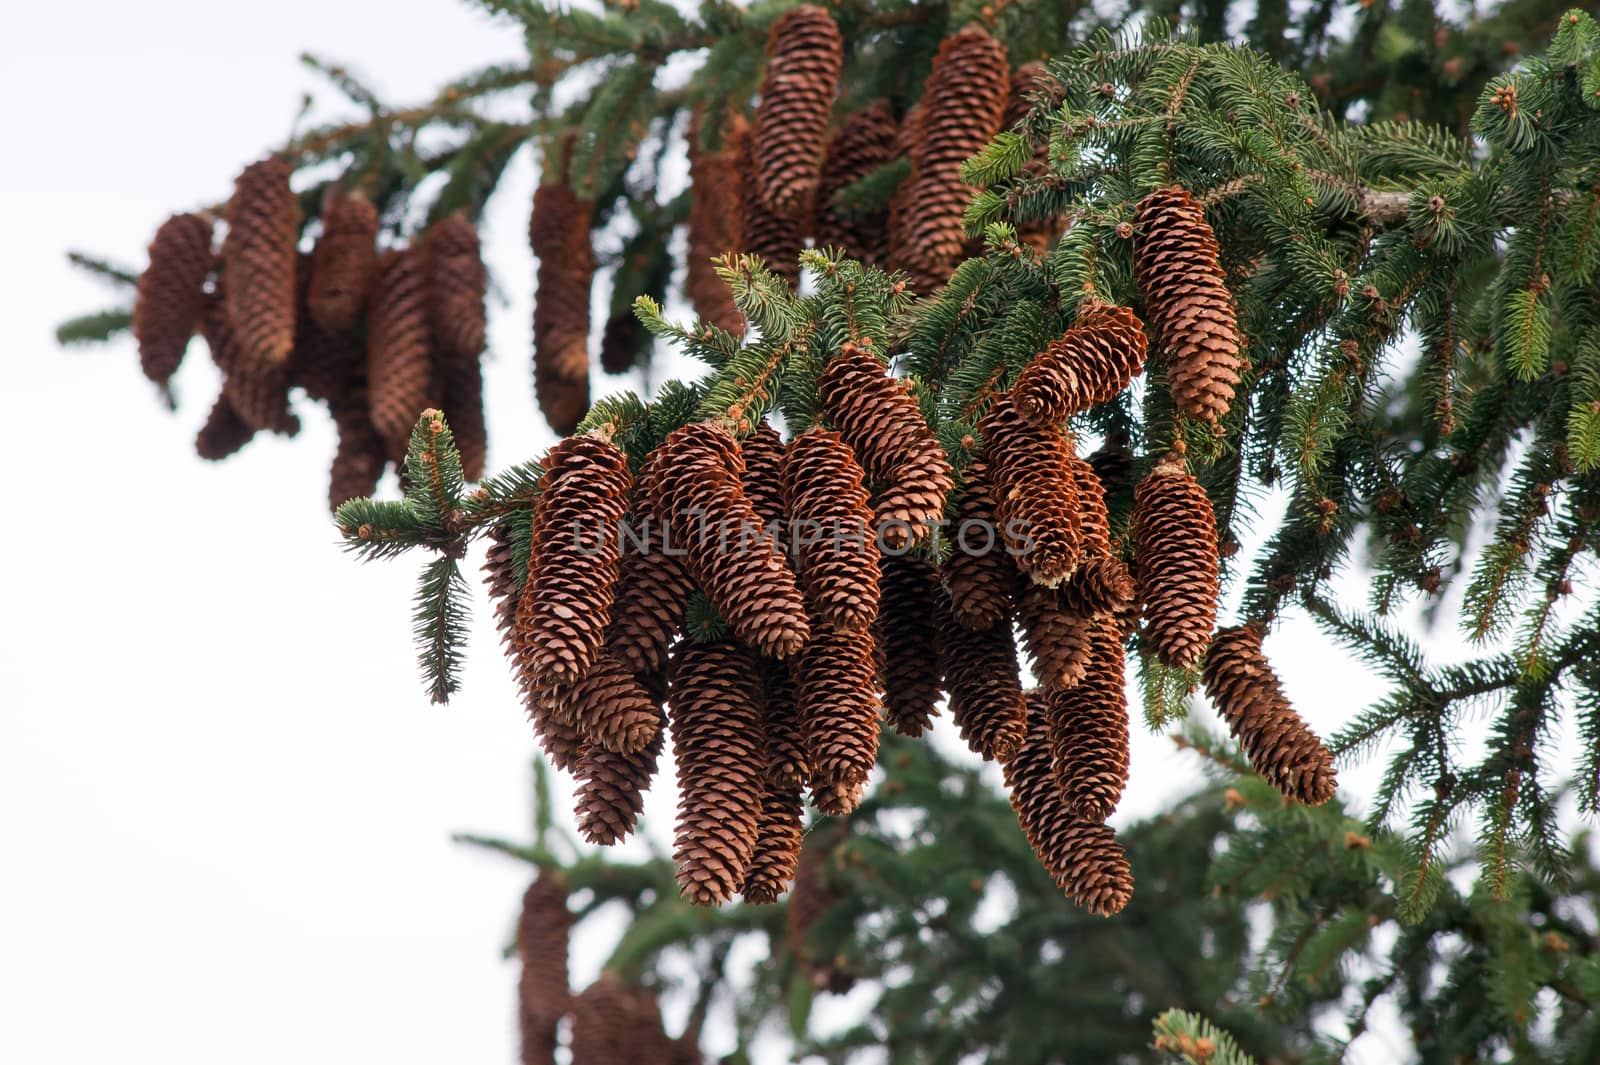 Many pine cones, pine trees in the room.